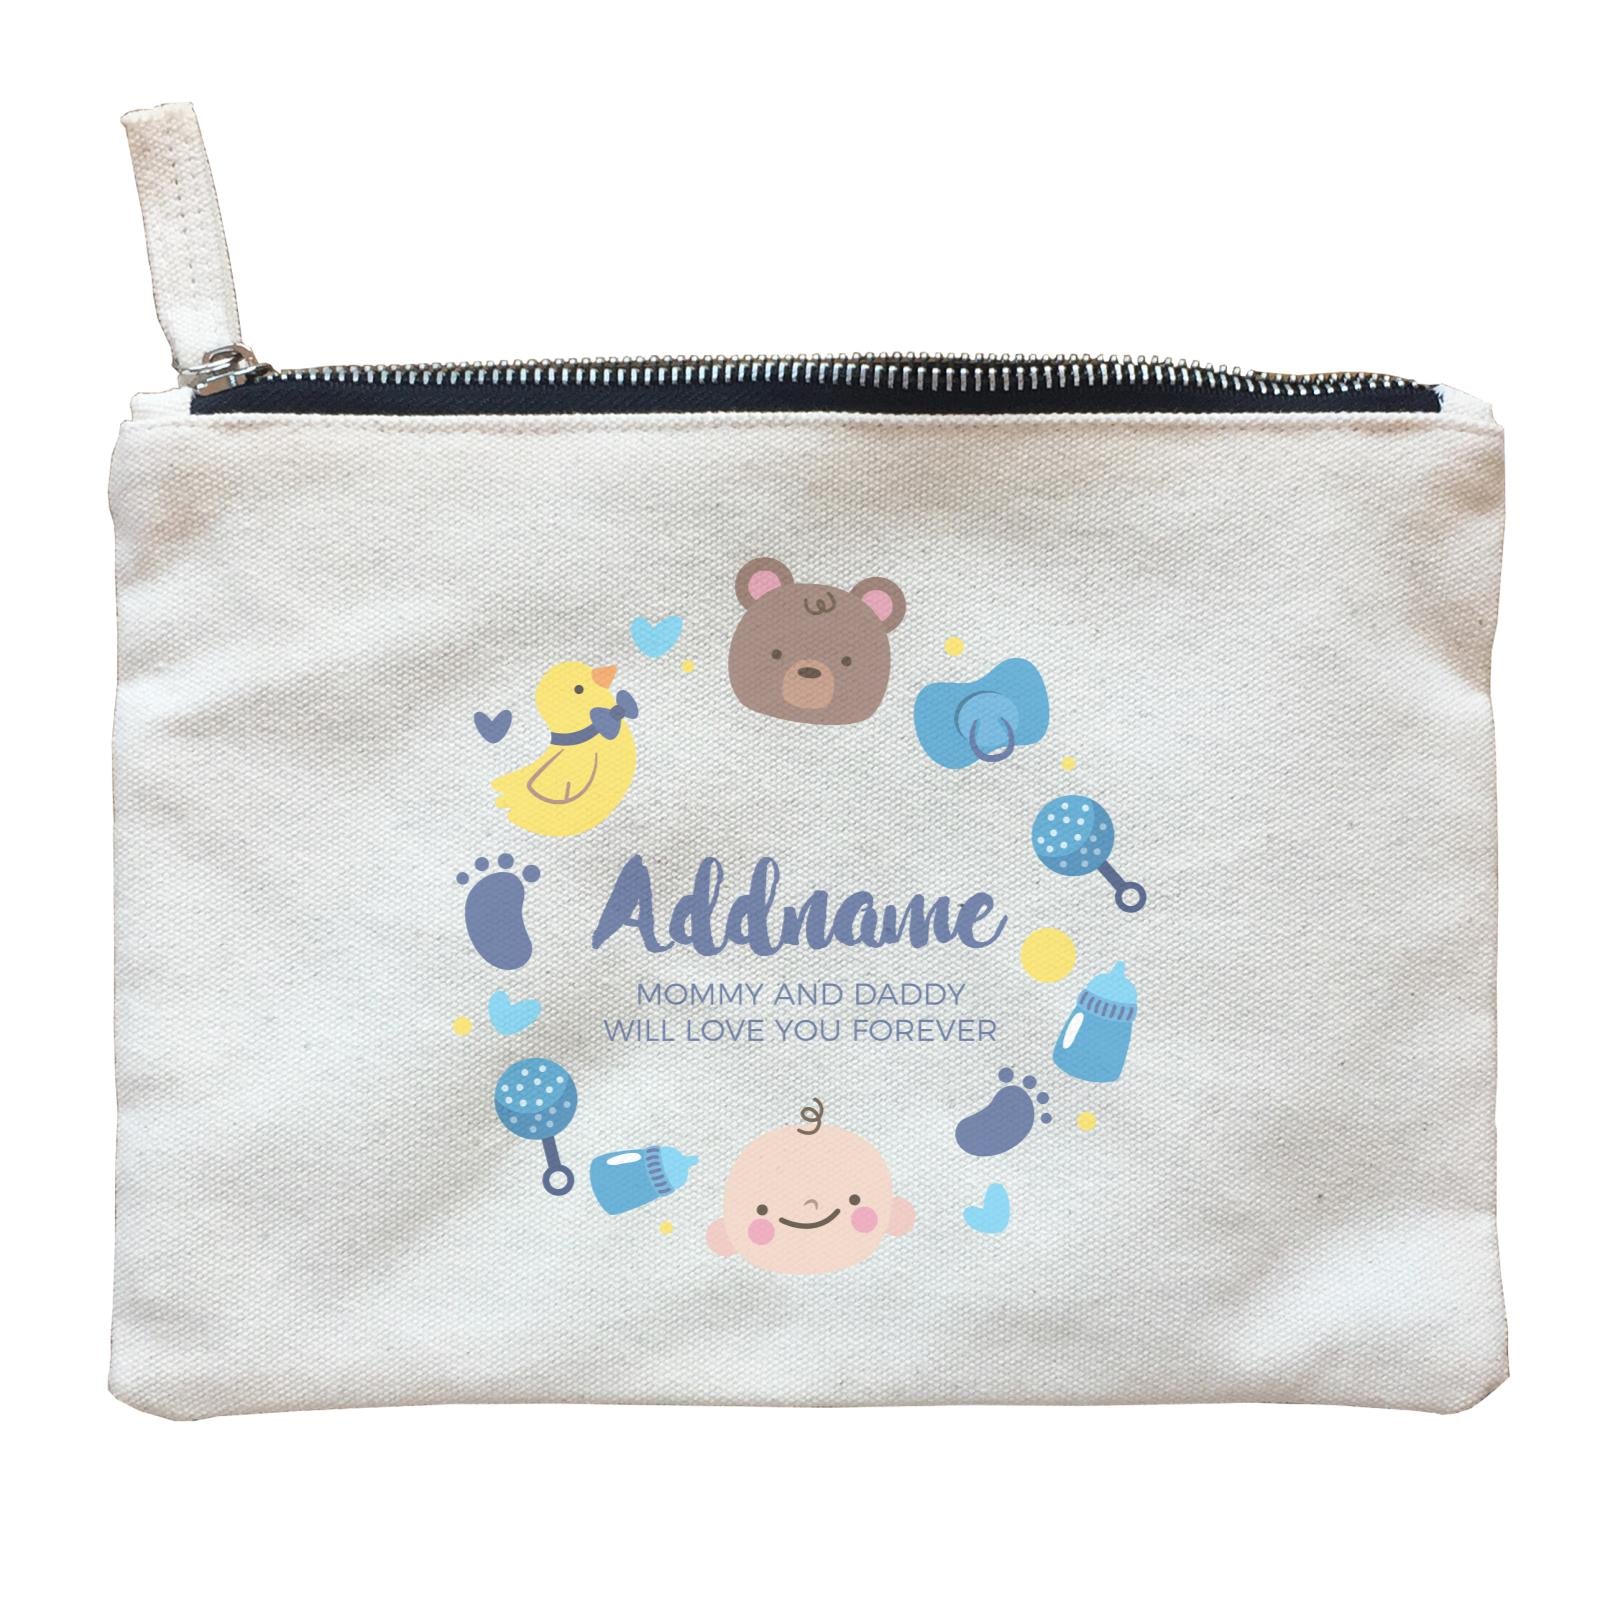 Cute Baby Boy Elements Personalizable with Name and Text Zipper Pouch